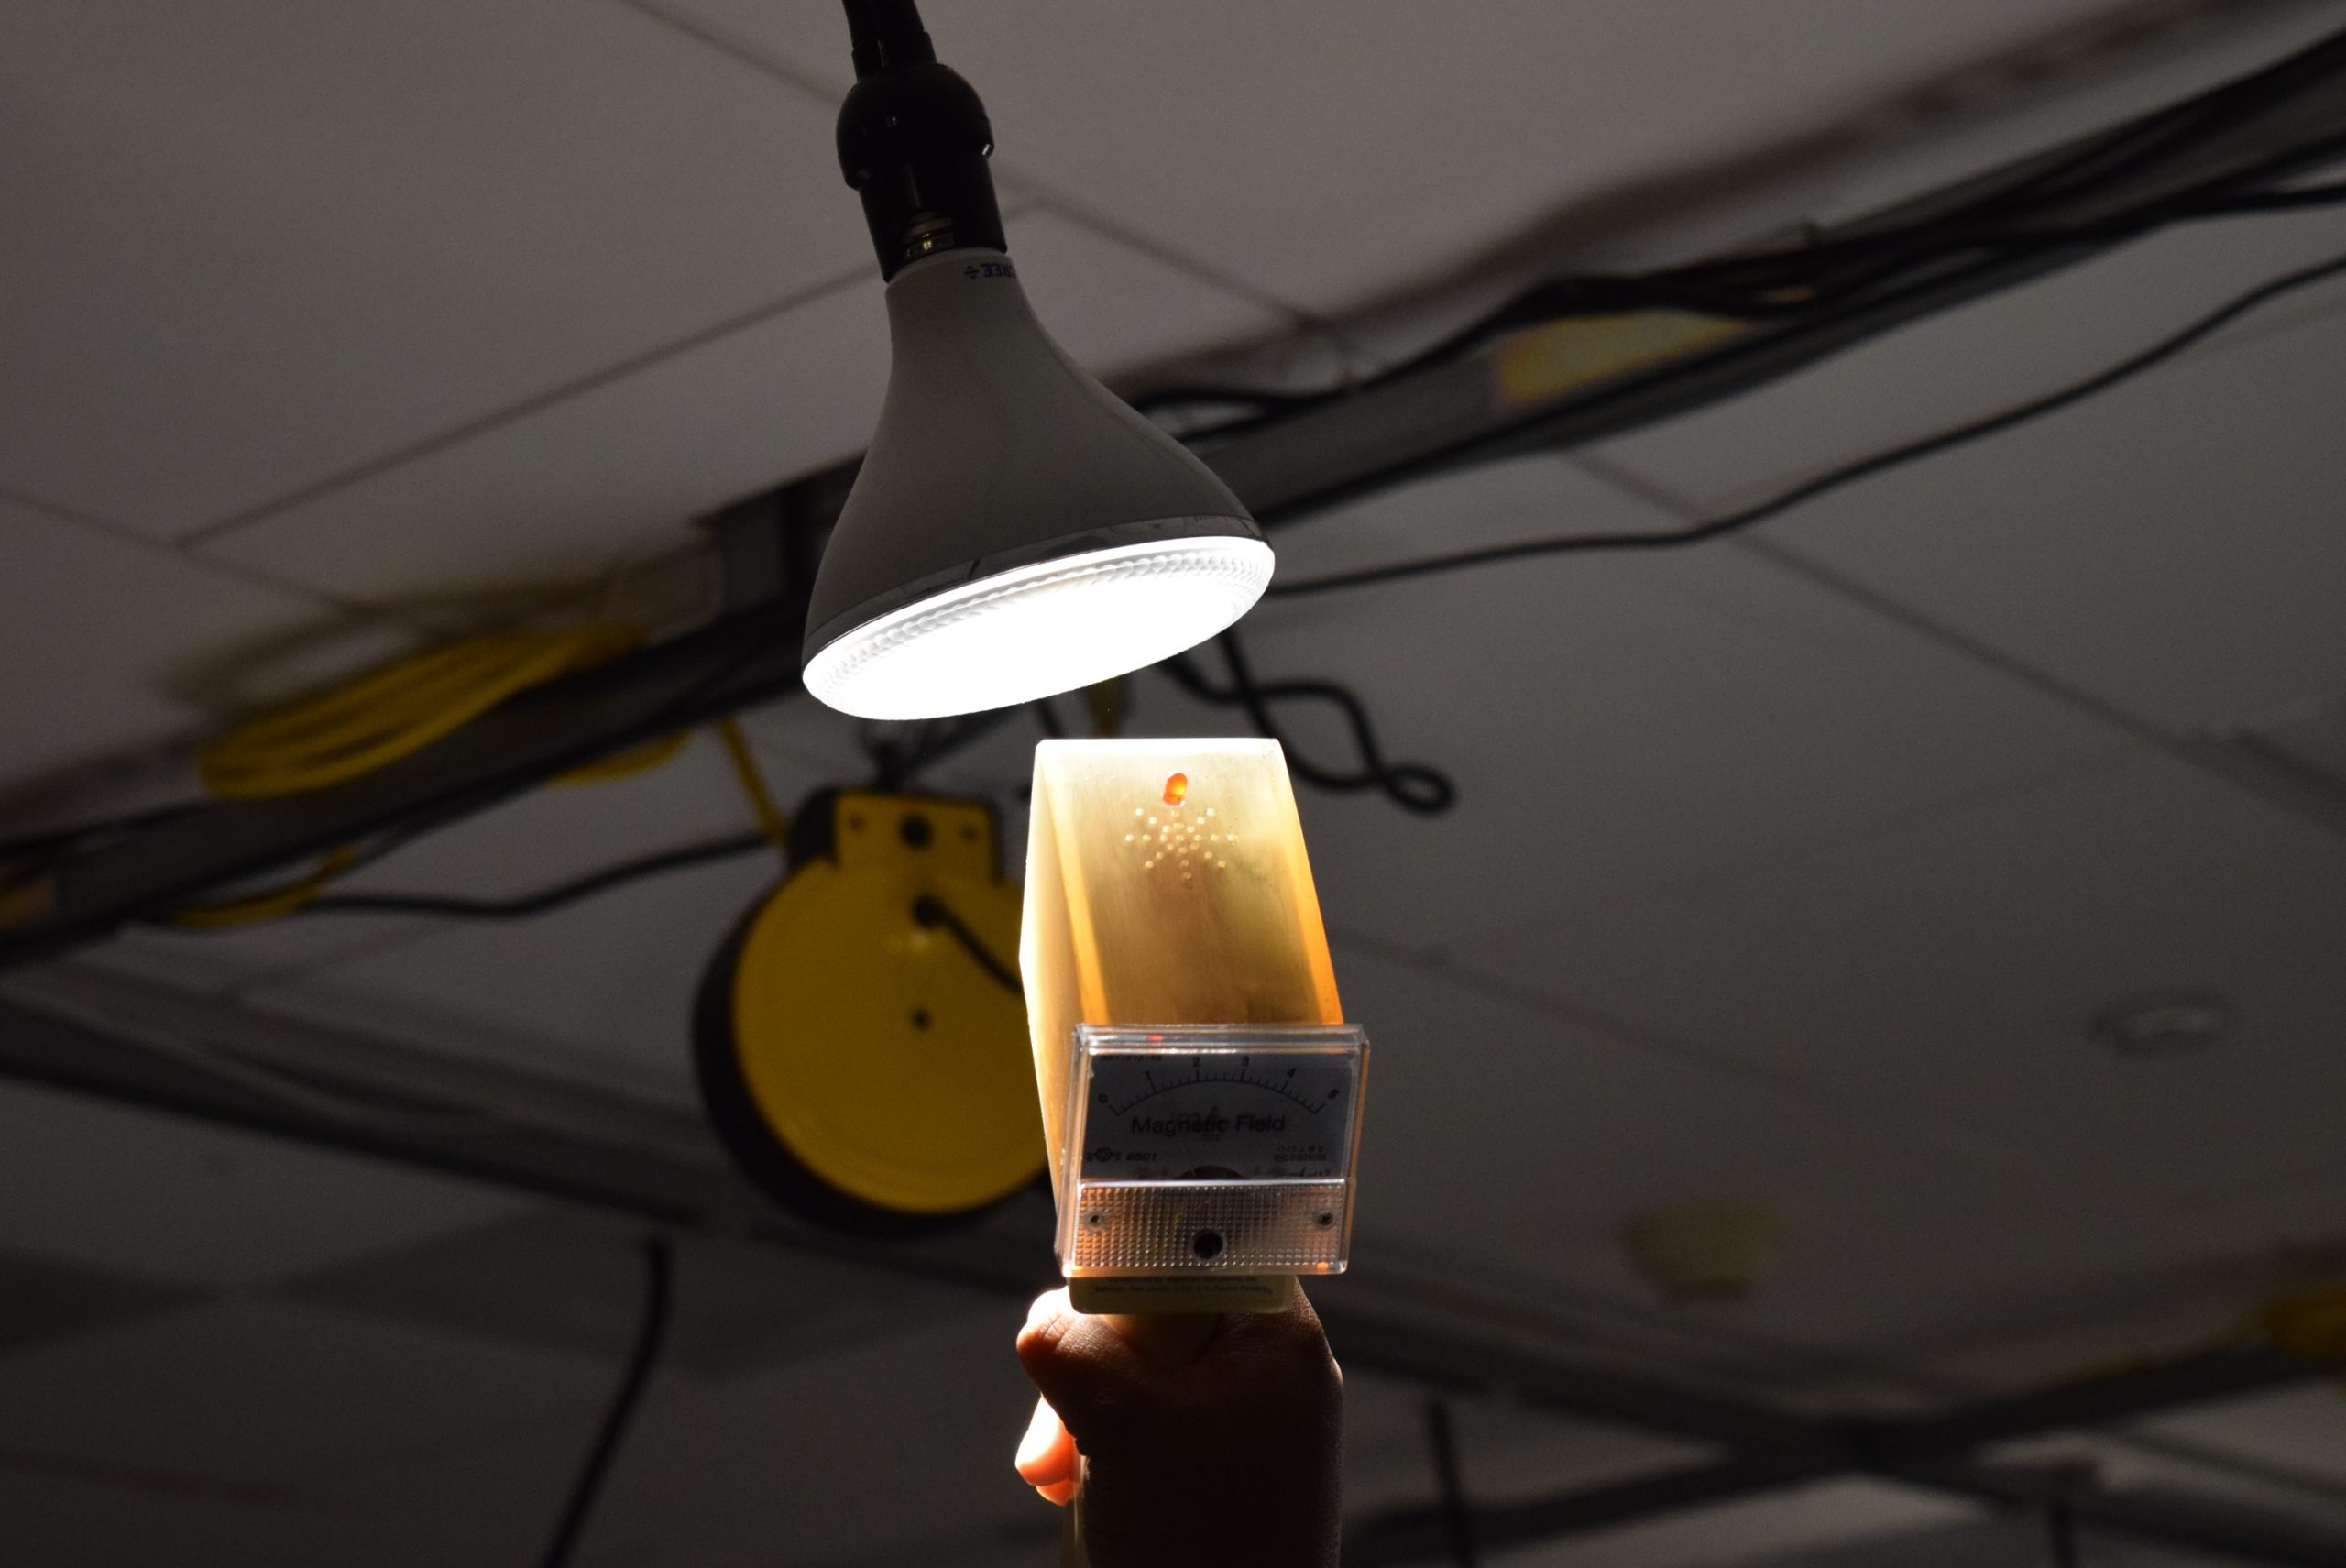 Meiger Counter pointing at a ceiling ligtht